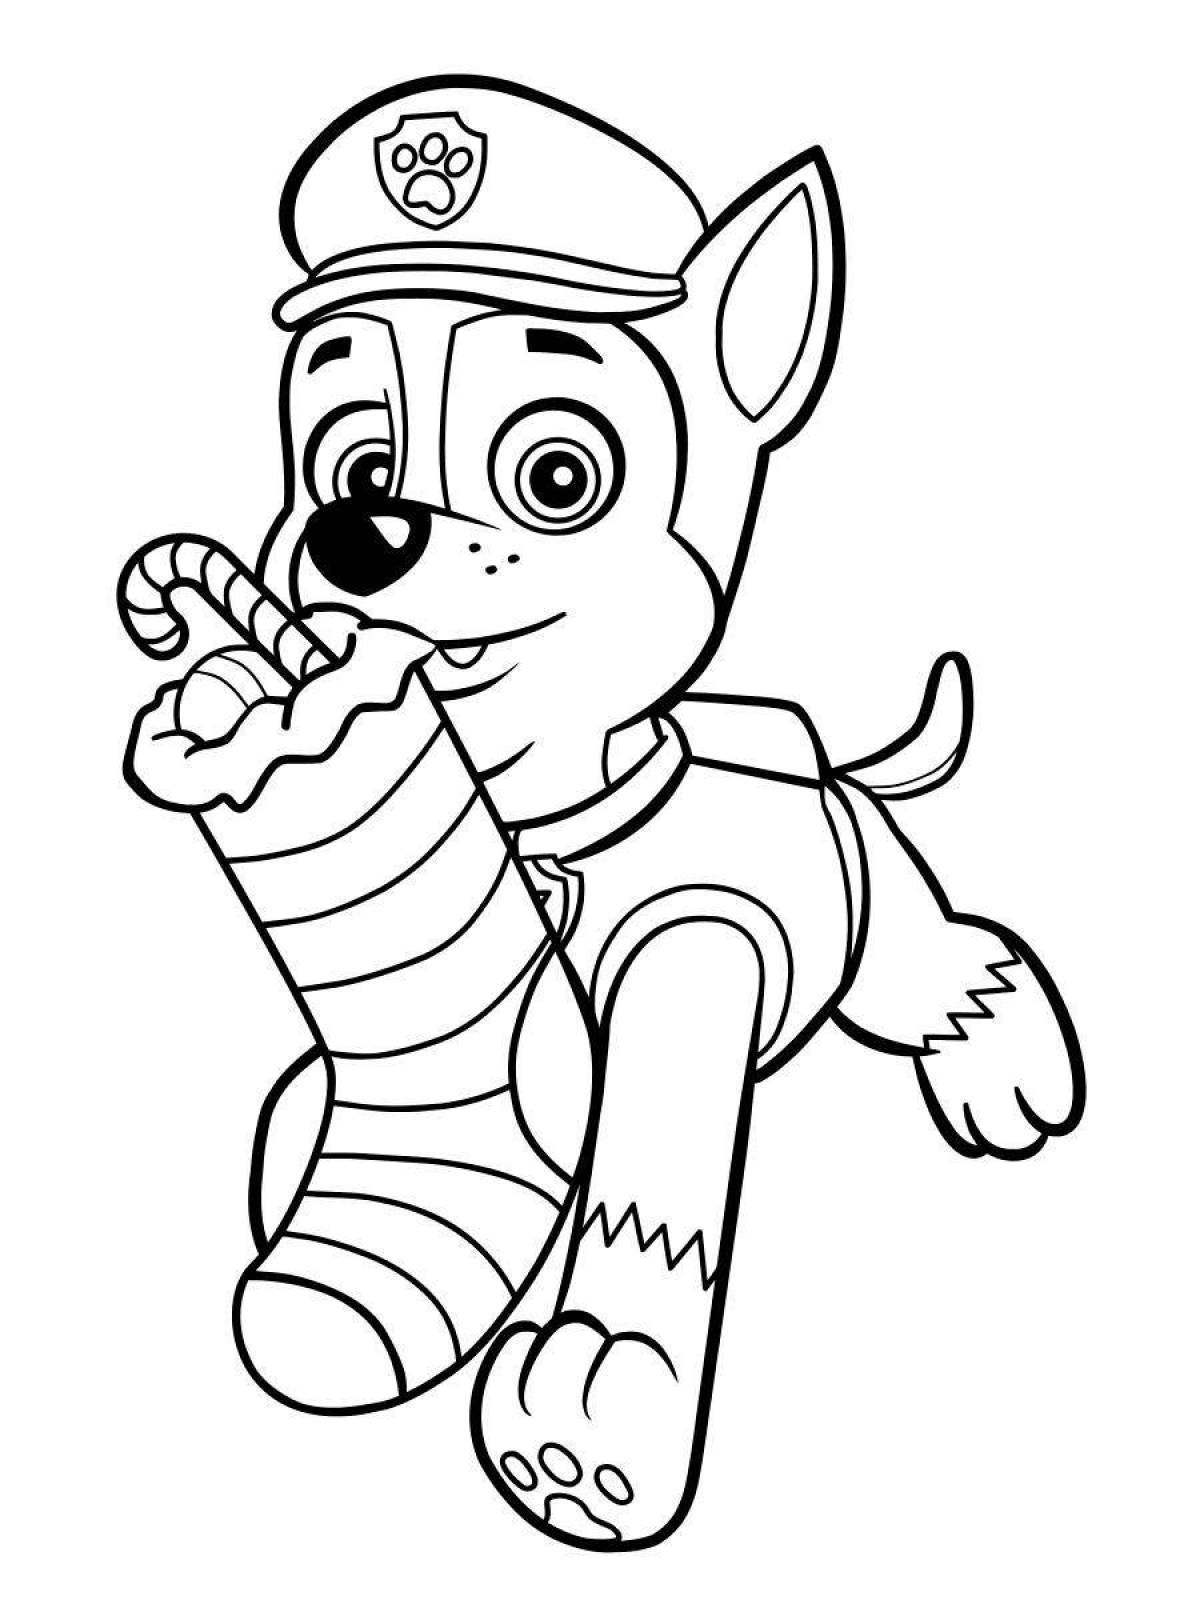 Adorable Paw Patrol coloring book for kids 5-6 years old